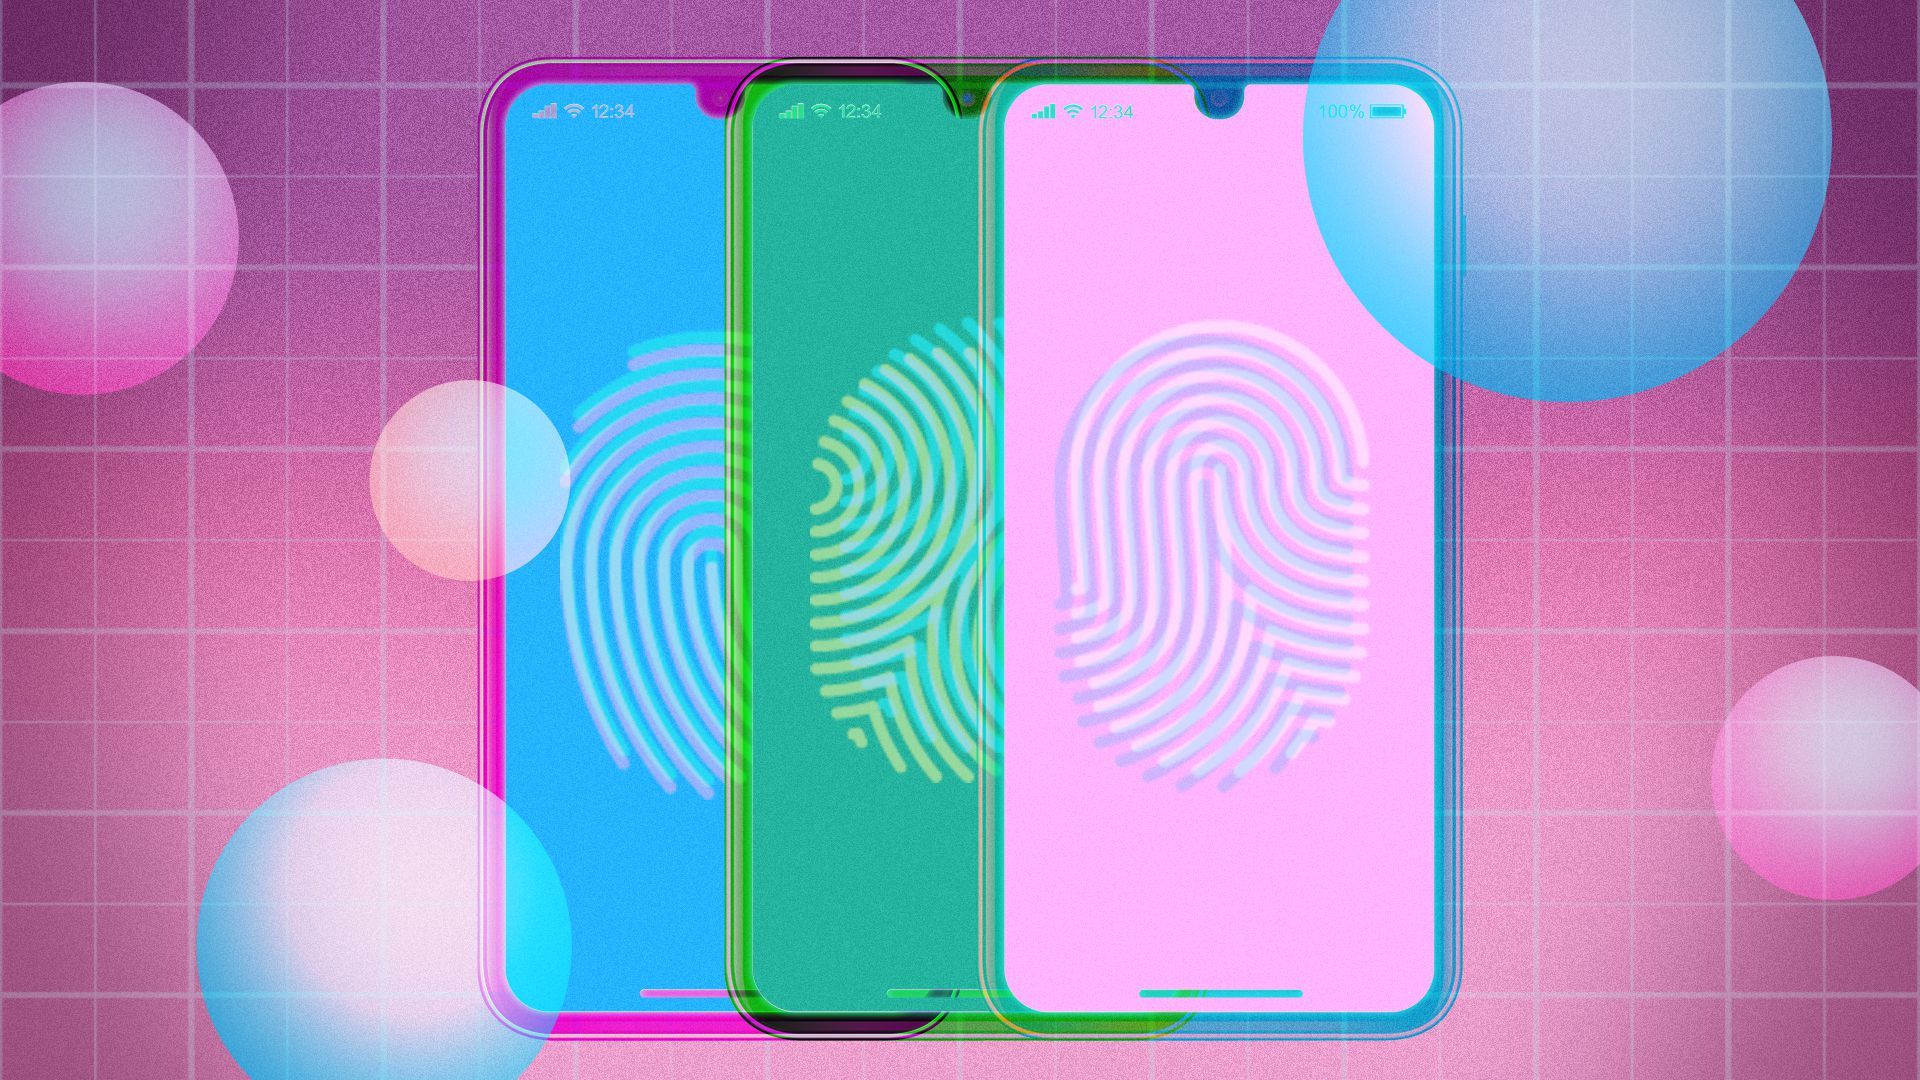 Illustration of three cellphones with stylized fingerprints on a grid with circles